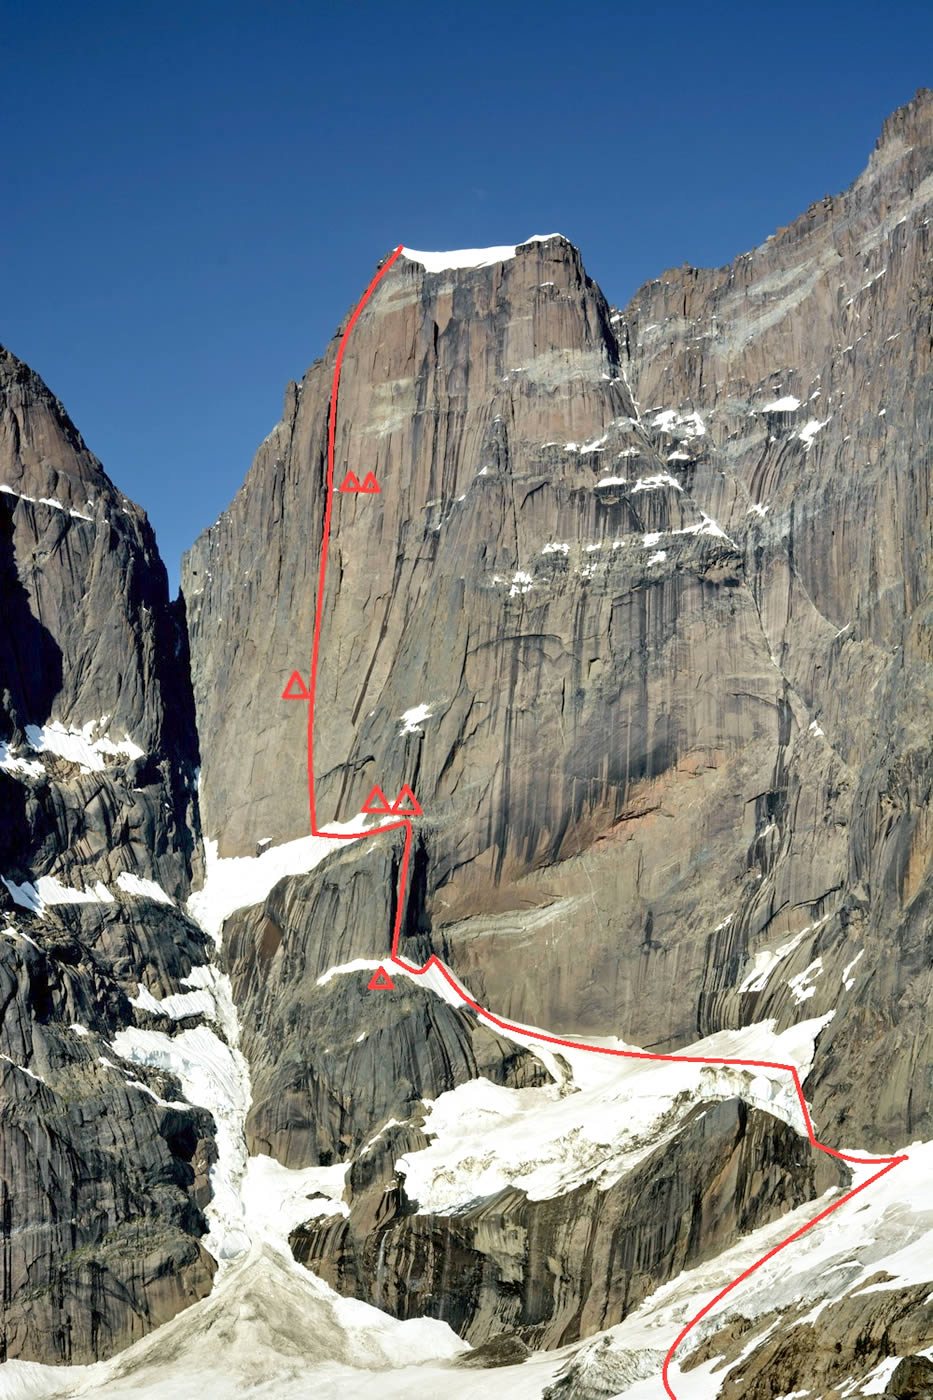 This photo has the team's new route, Metrophobia (7a A2+ 120-degree ice 1700m), marked in red on the west face of Greenland's Apostelens Tommelfinger (2315m).